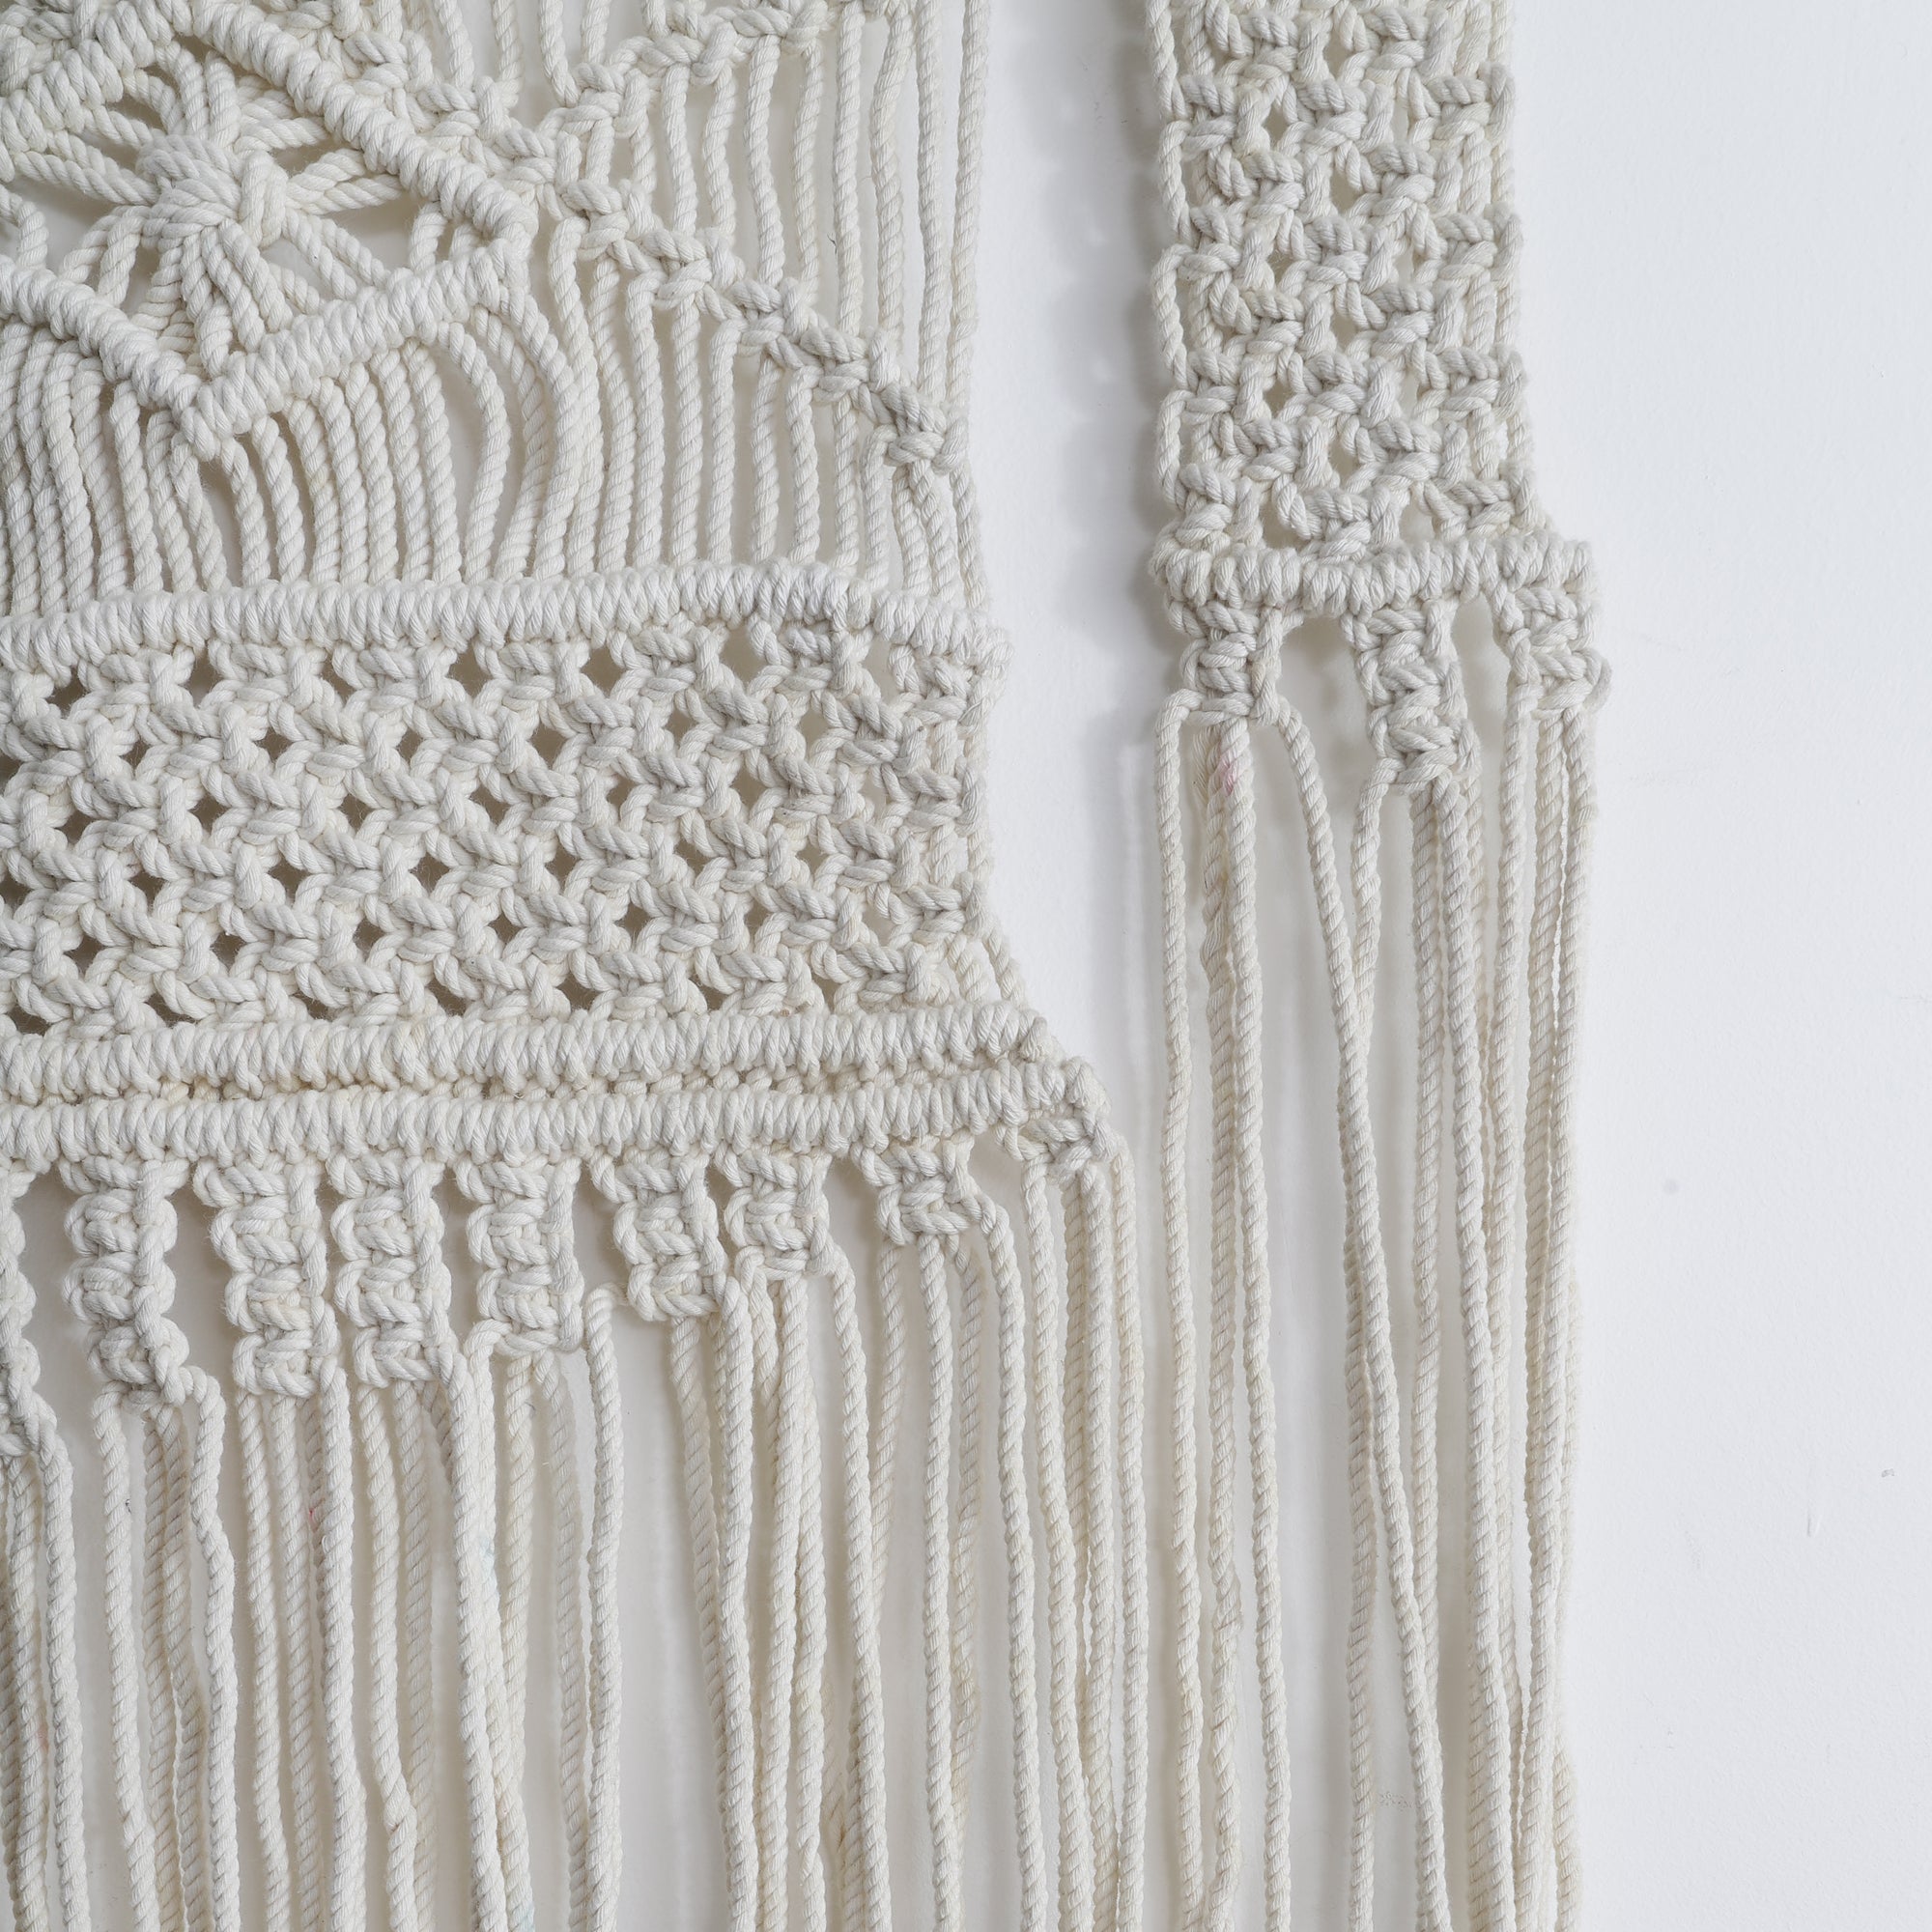 Handcrafted Bohemian Macrame Tapestry